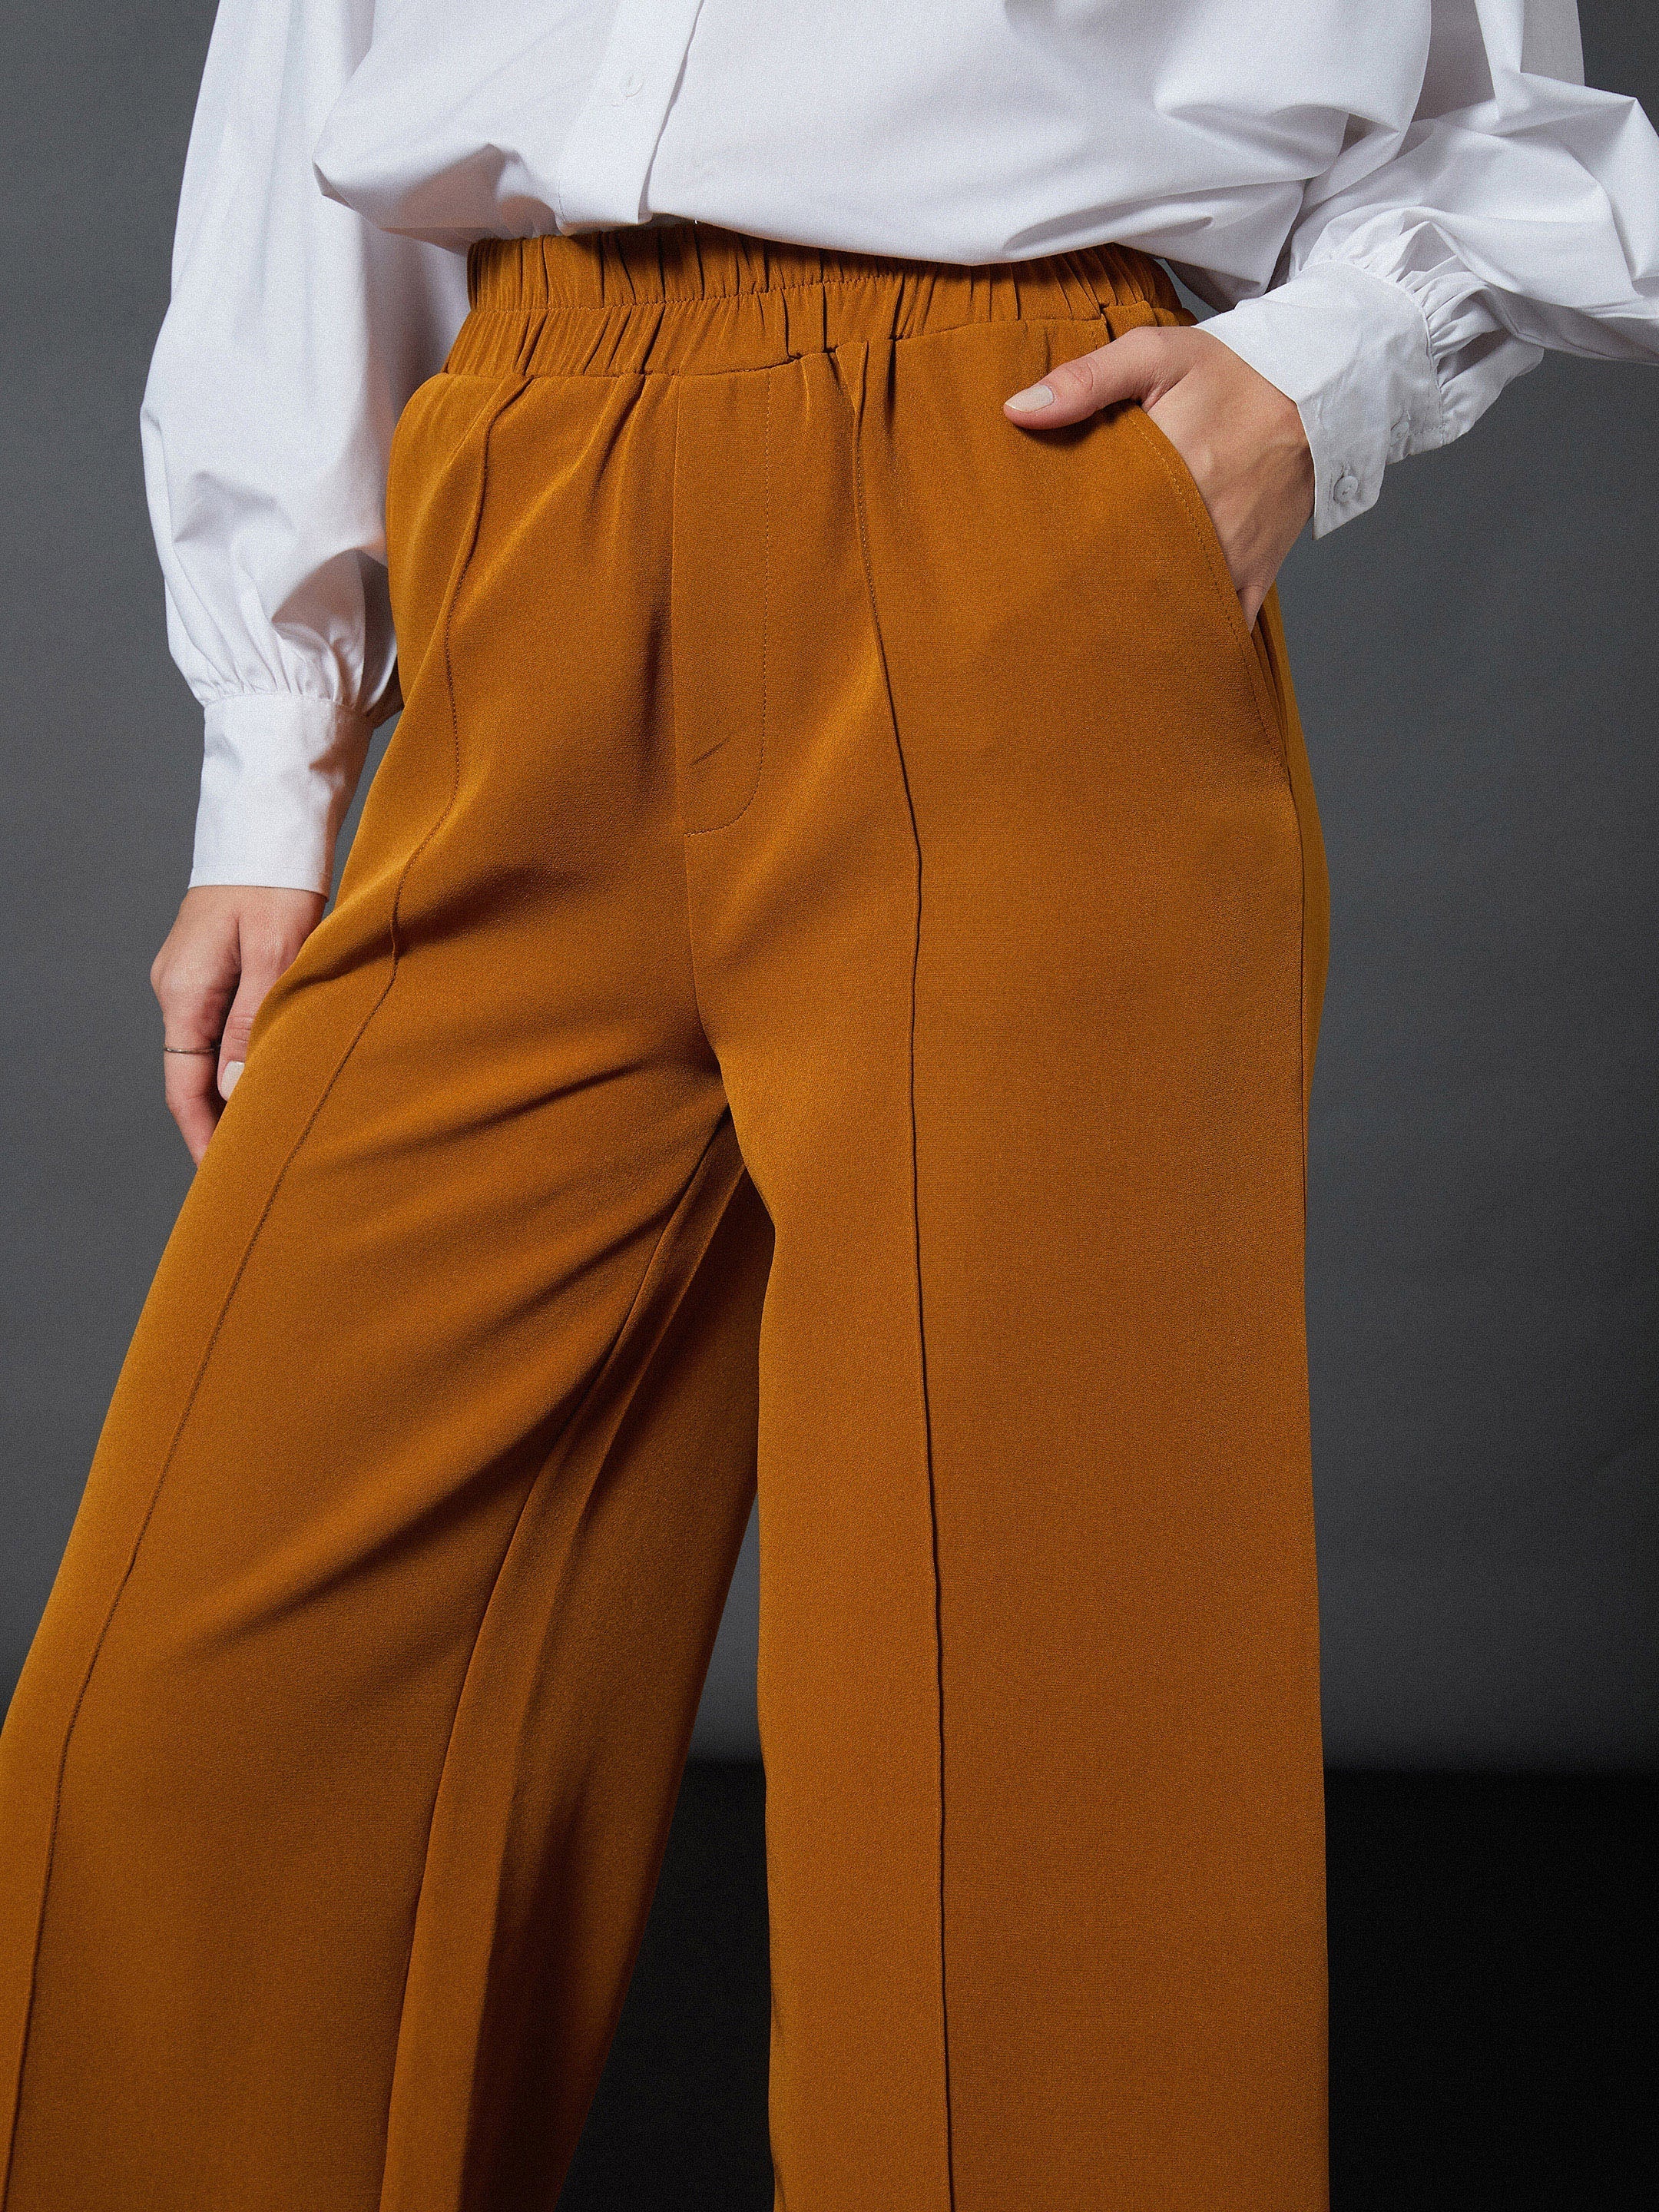 Solid Color Women's Palazzo Pants in Mustard PP0304 130000 13